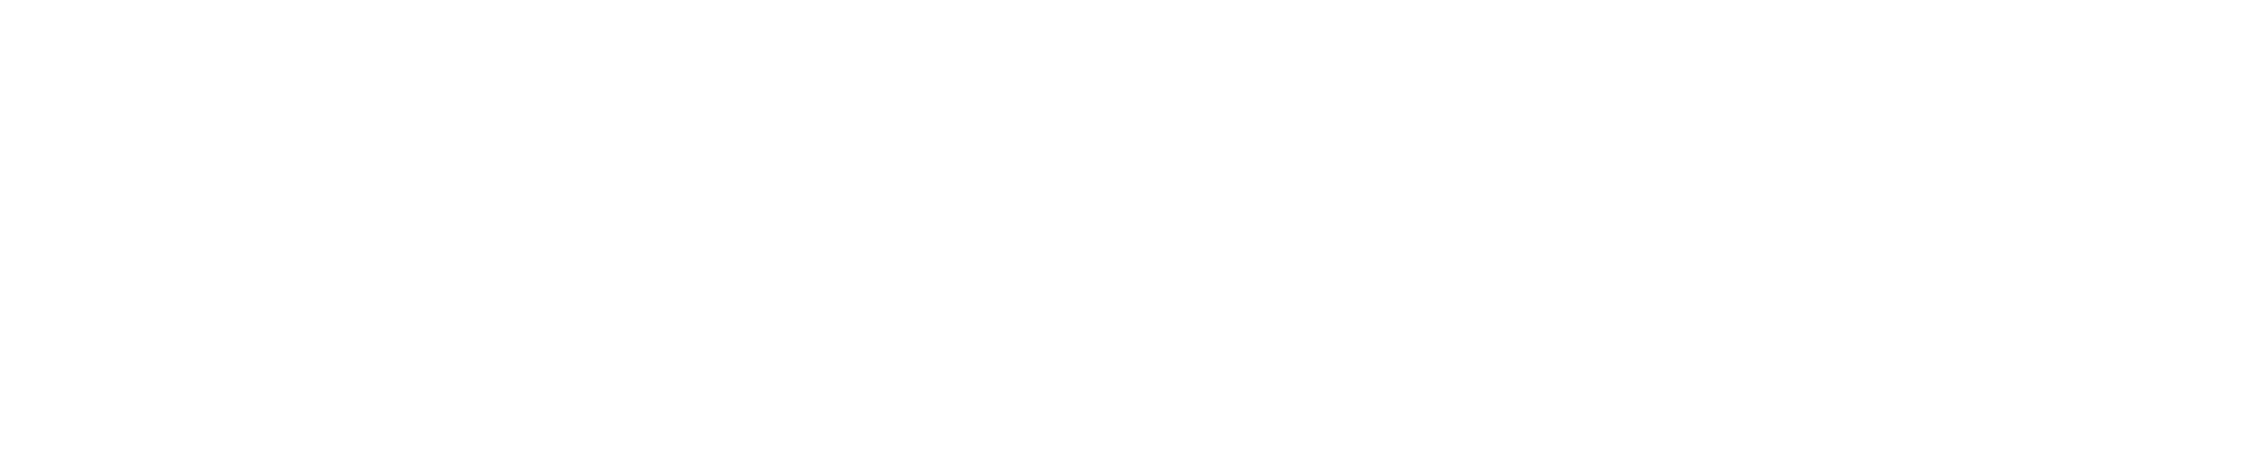 discovery channel logo white png